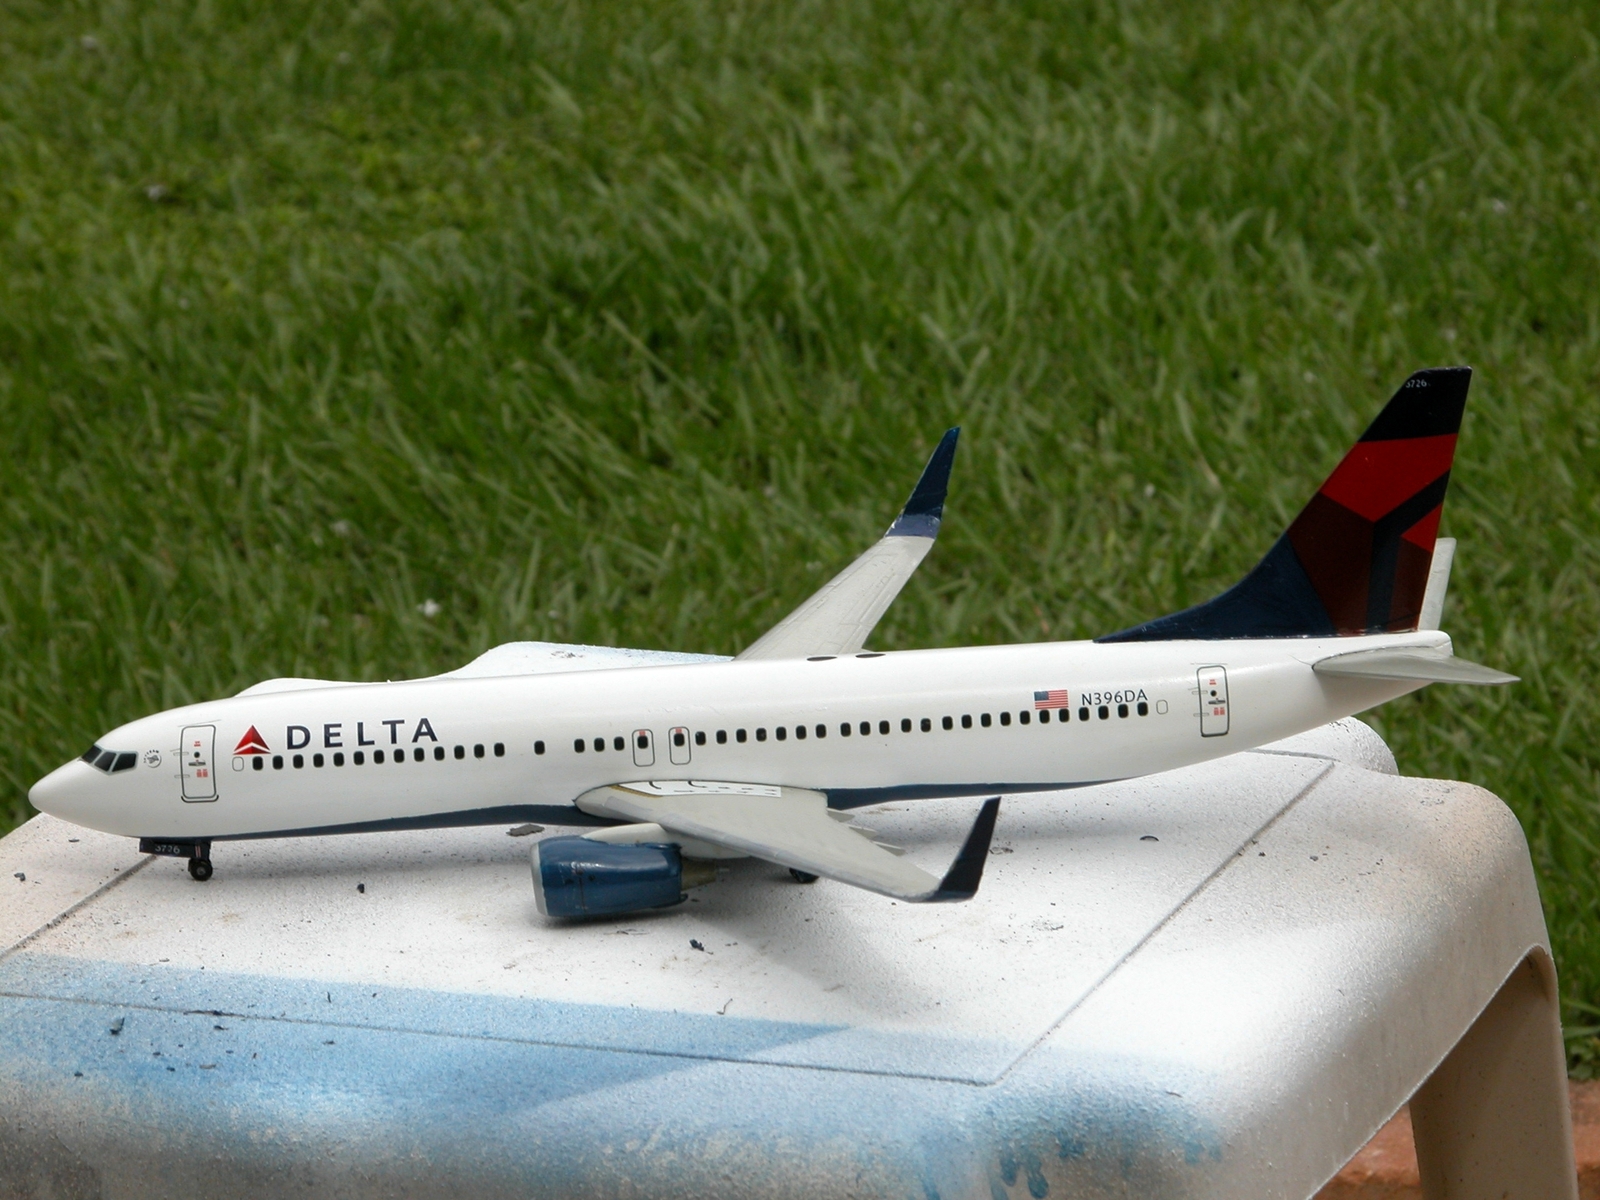 1/144 Scale Decal GOL 737-800